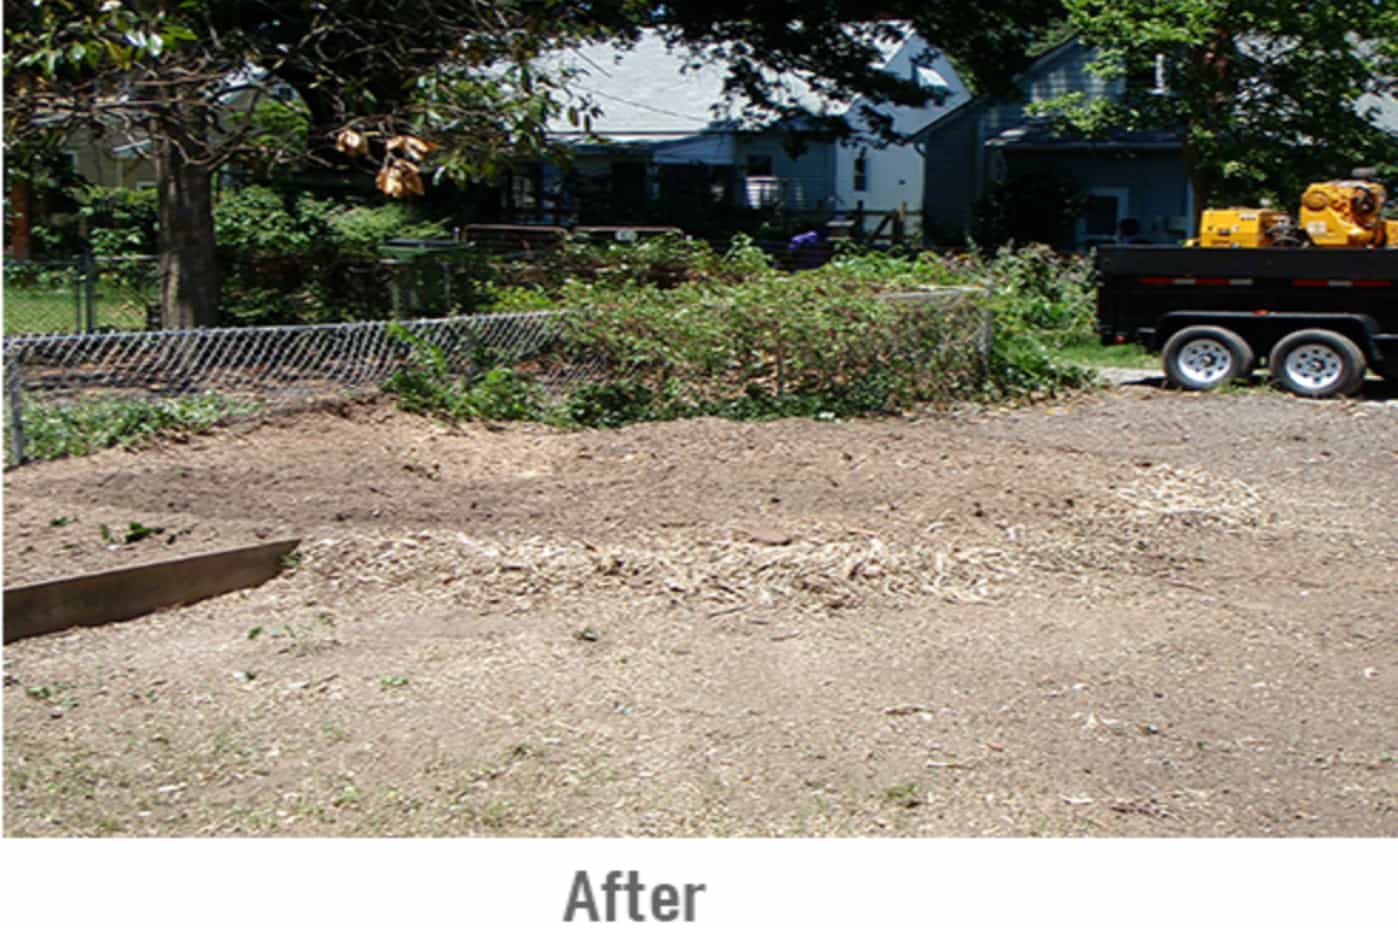 An empty dirt patch of land with a slight crater left behind after a tree stump removal.  A blue house, a truck with equipment and a large tree can be seen in the foreground